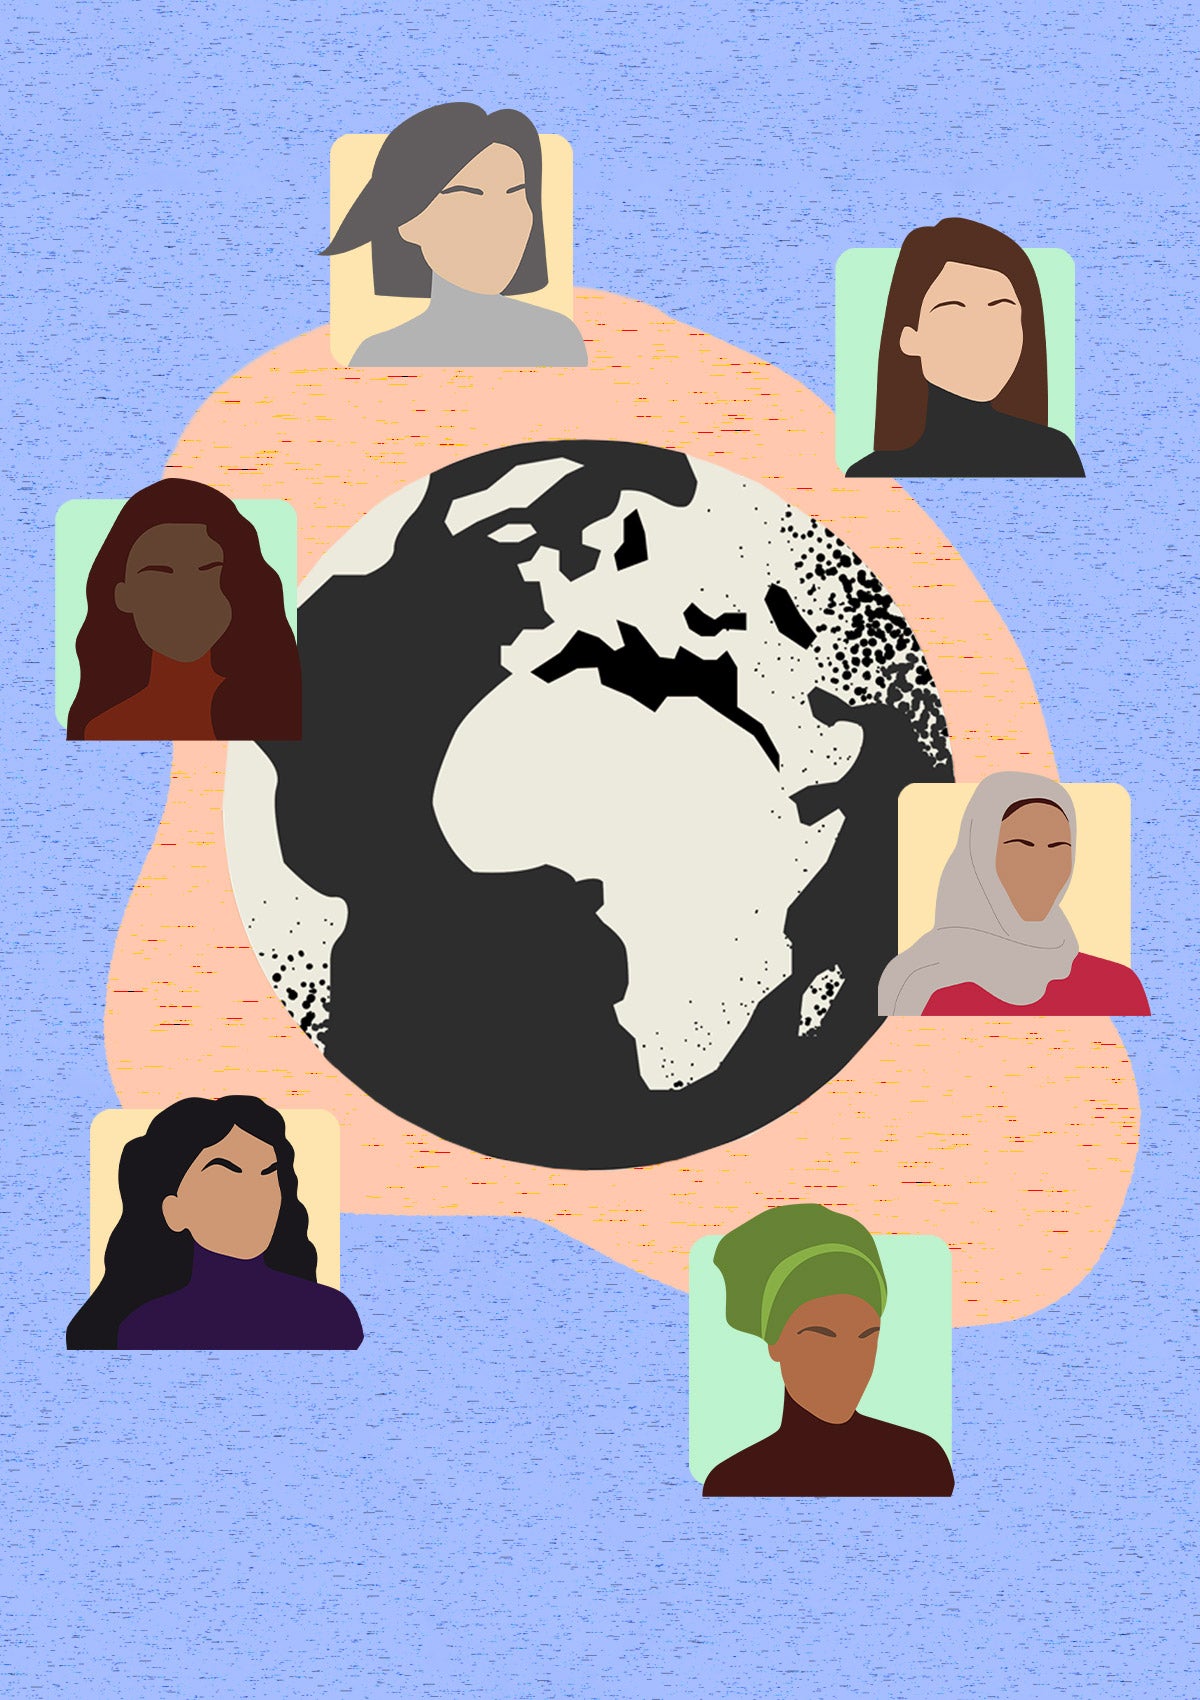 Illustration: Six diverse illustrated female figures, shoulder height and above, rest in six individual squares around an illustrated black and white globe. The composition is on a purple-speckled background with a coral-speckled fluid shape behind the earth.